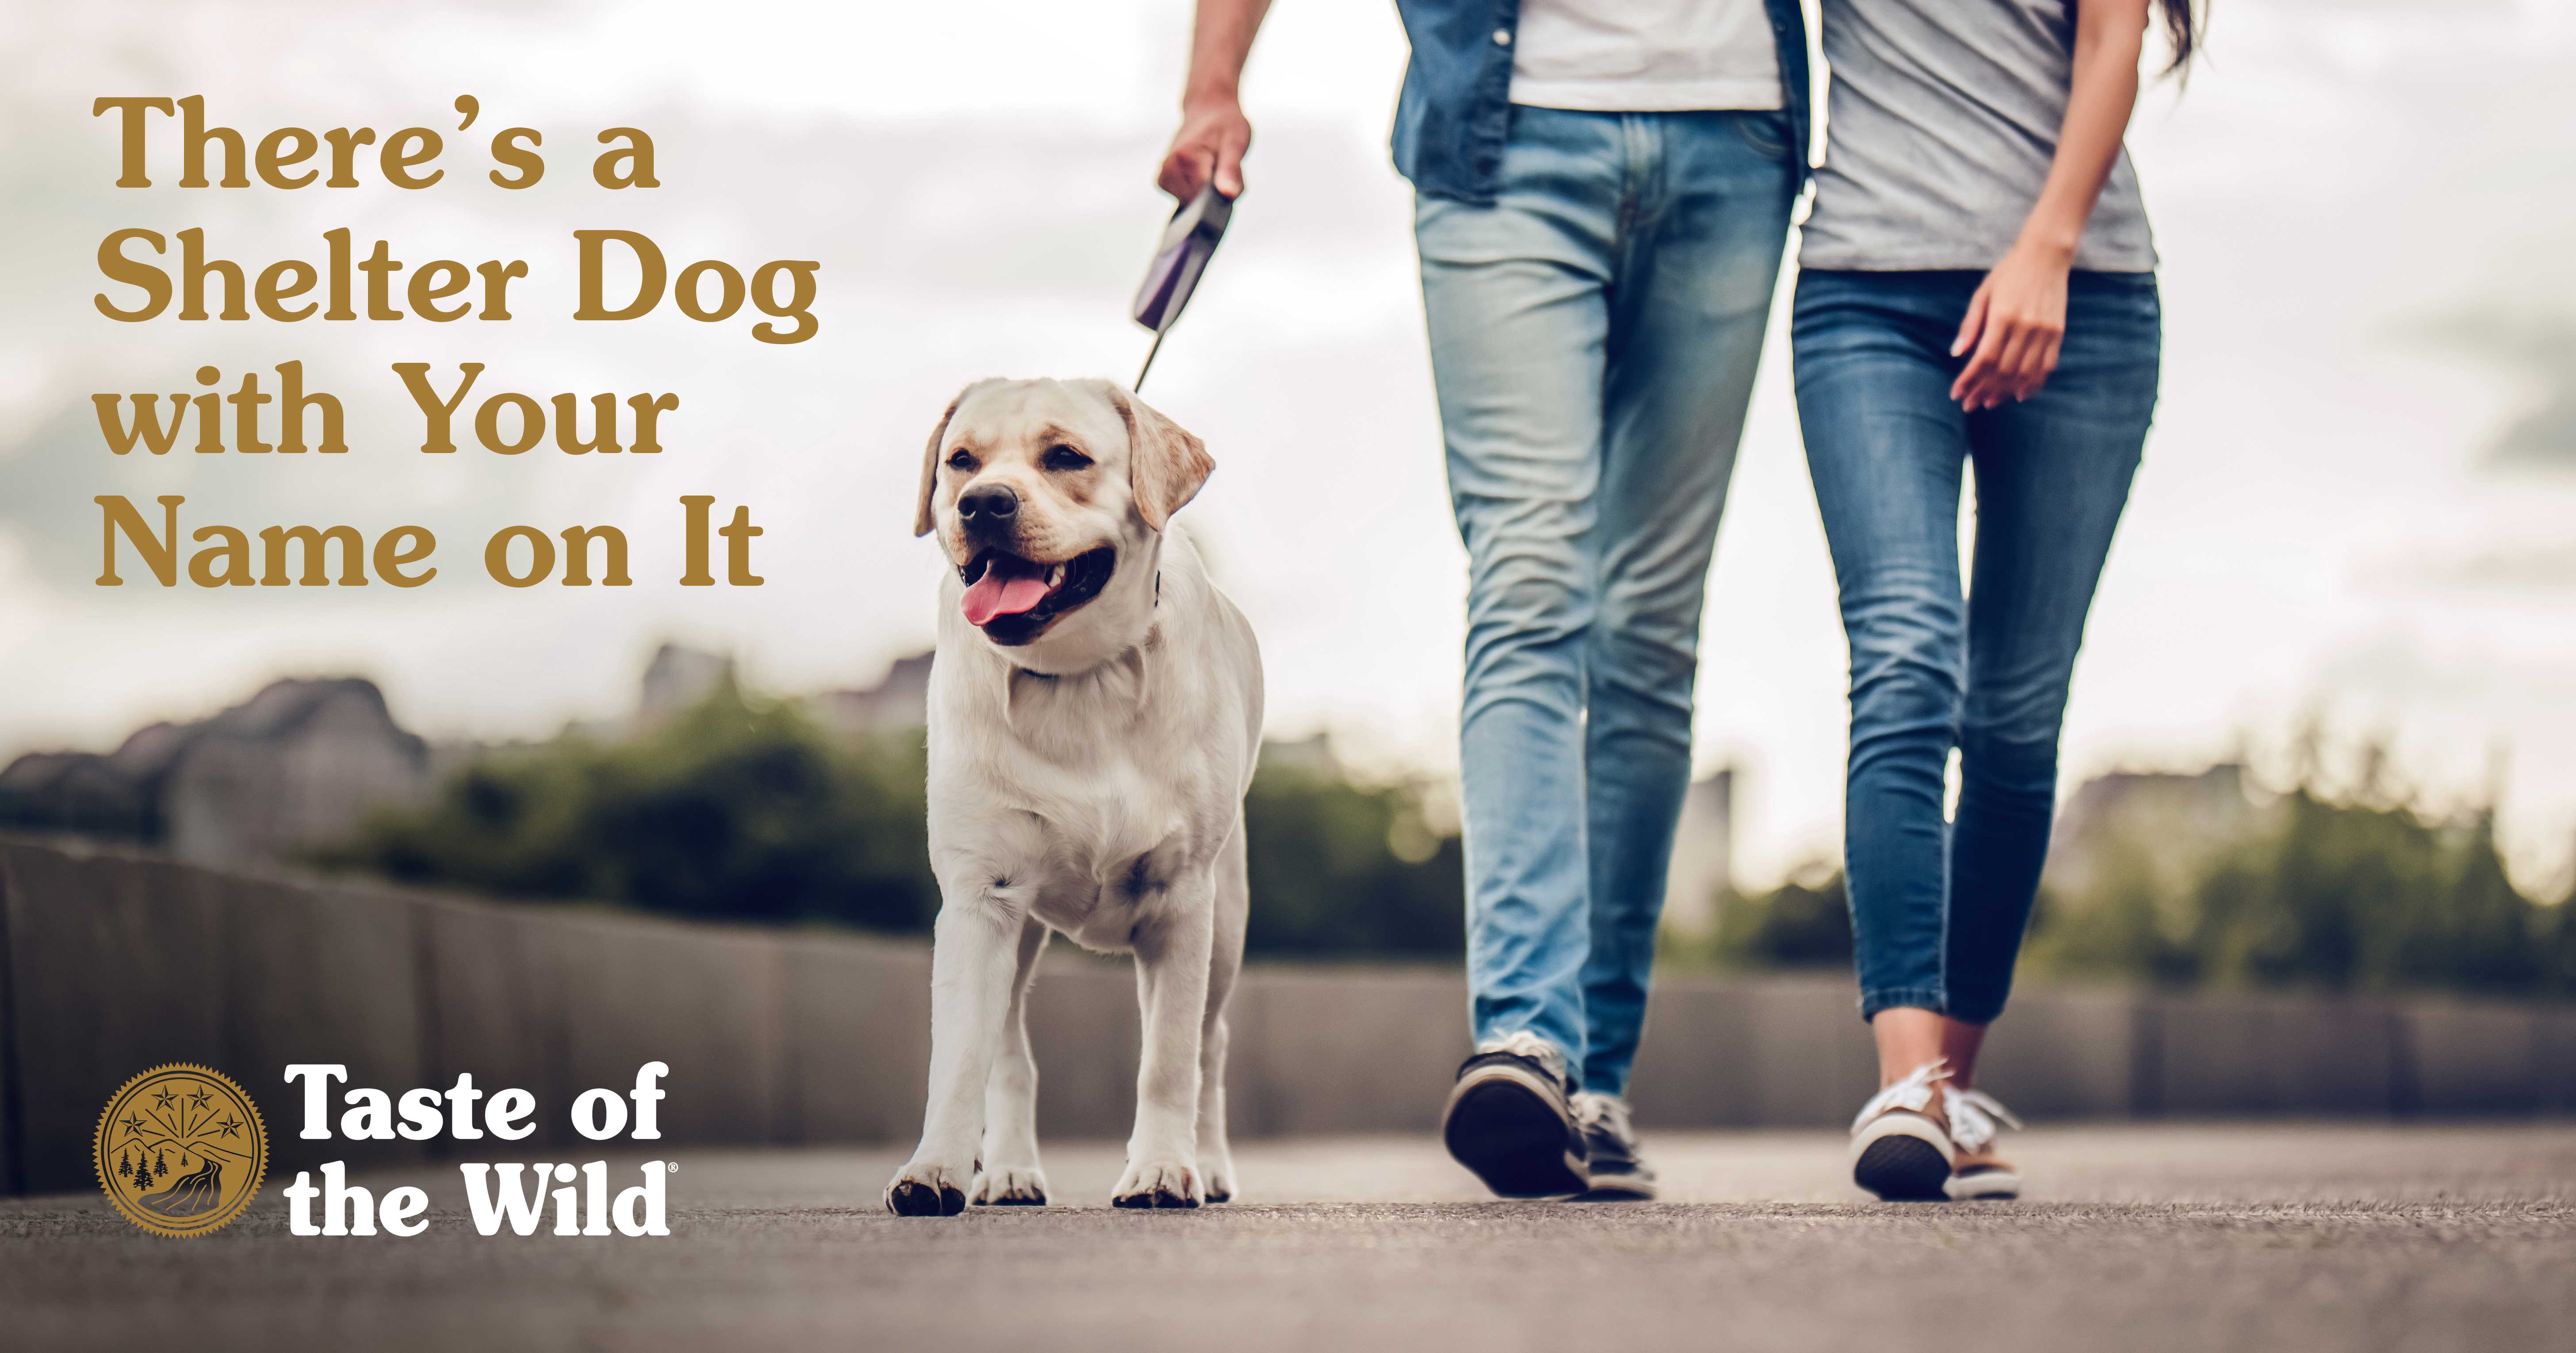 Couple Walking with a Labrador Retriever Dog at the Park | Taste of the Wild Pet Food